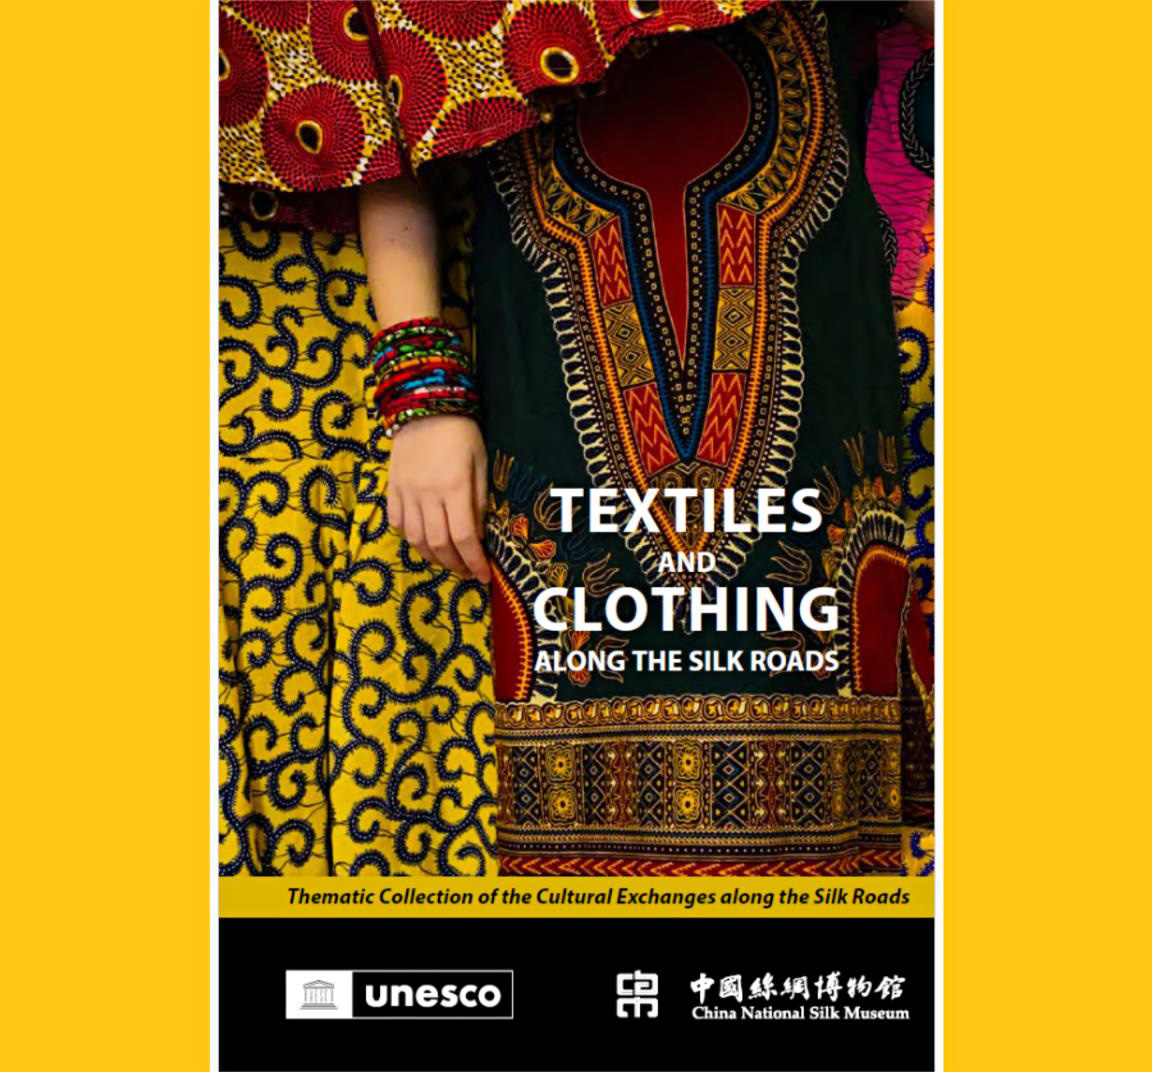 silk-roads-textiles-clothing-collection